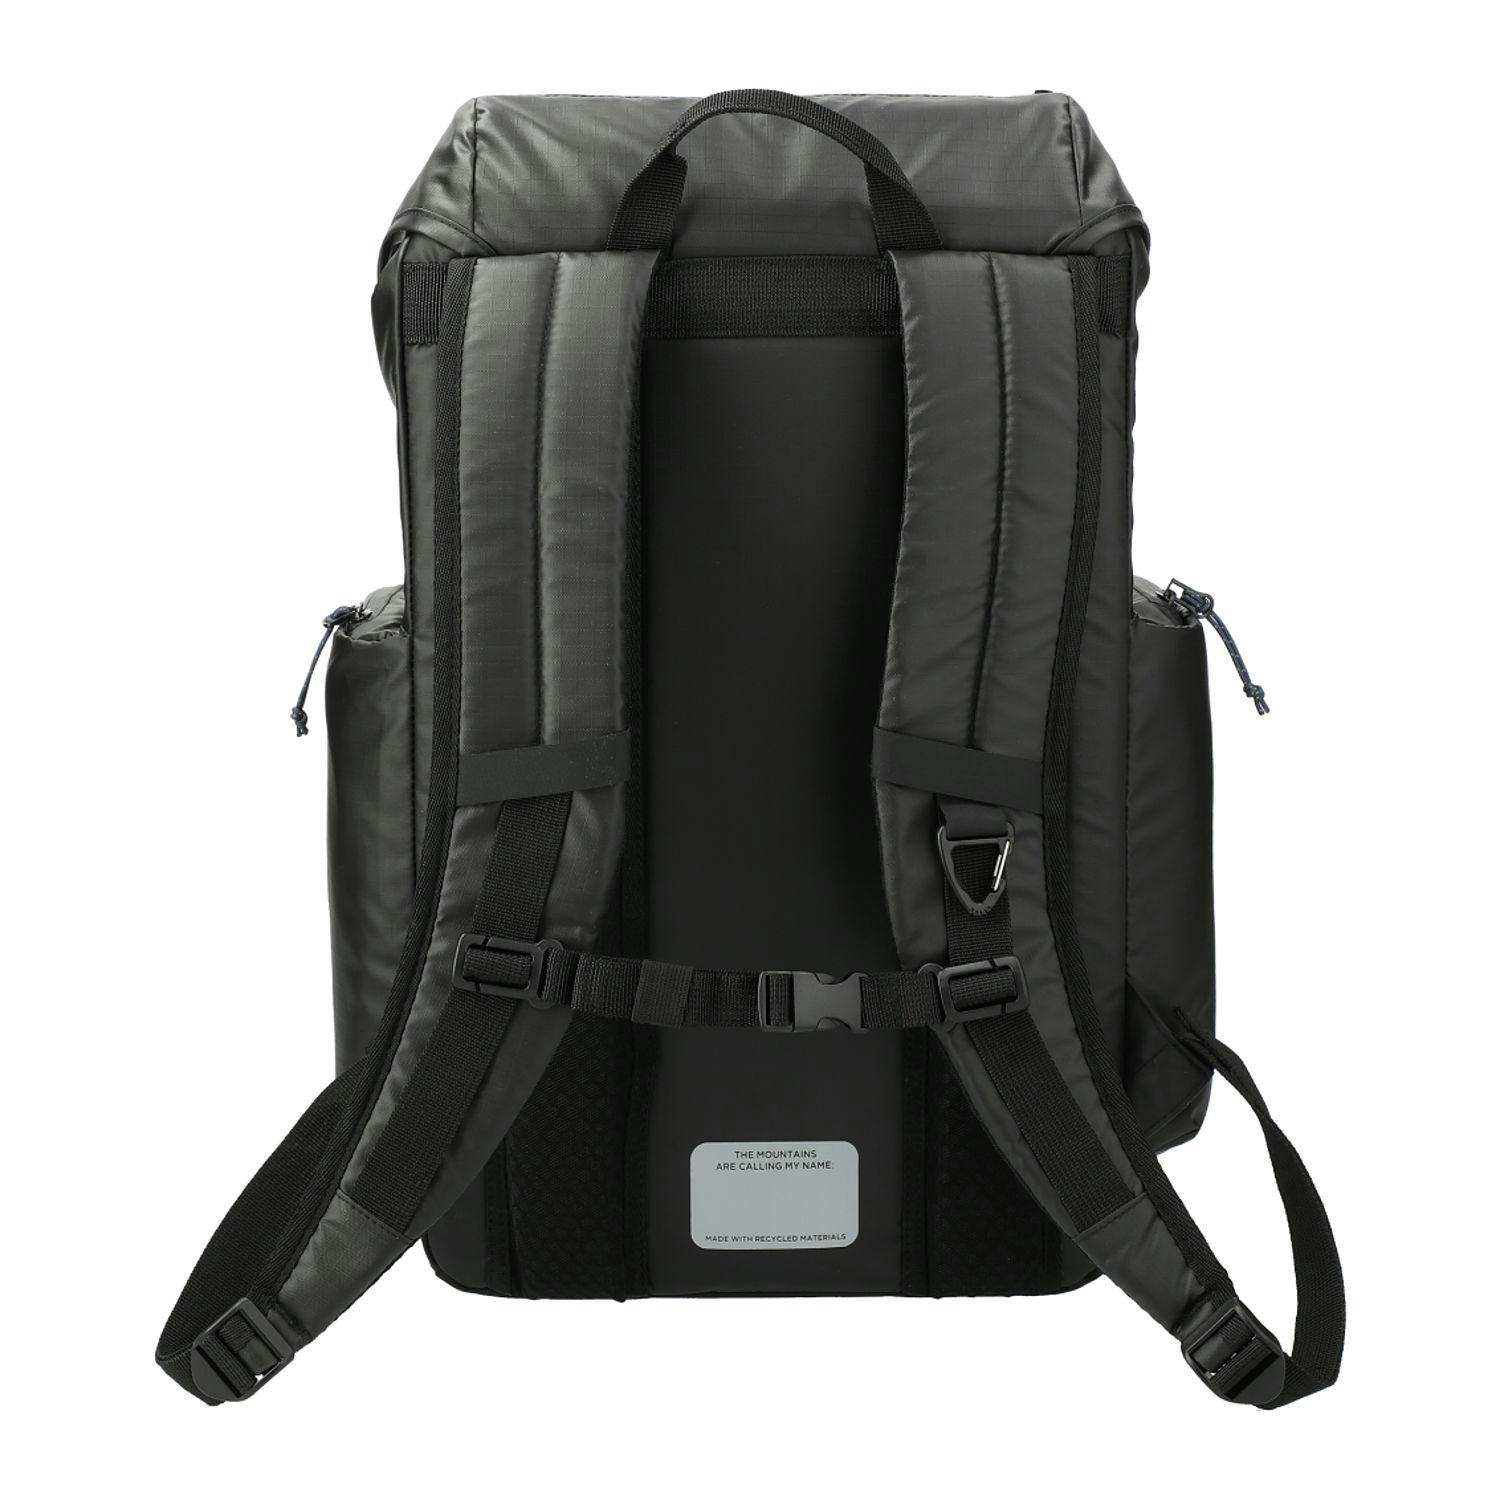 NBN Recycled Outdoor Rucksack - additional Image 1